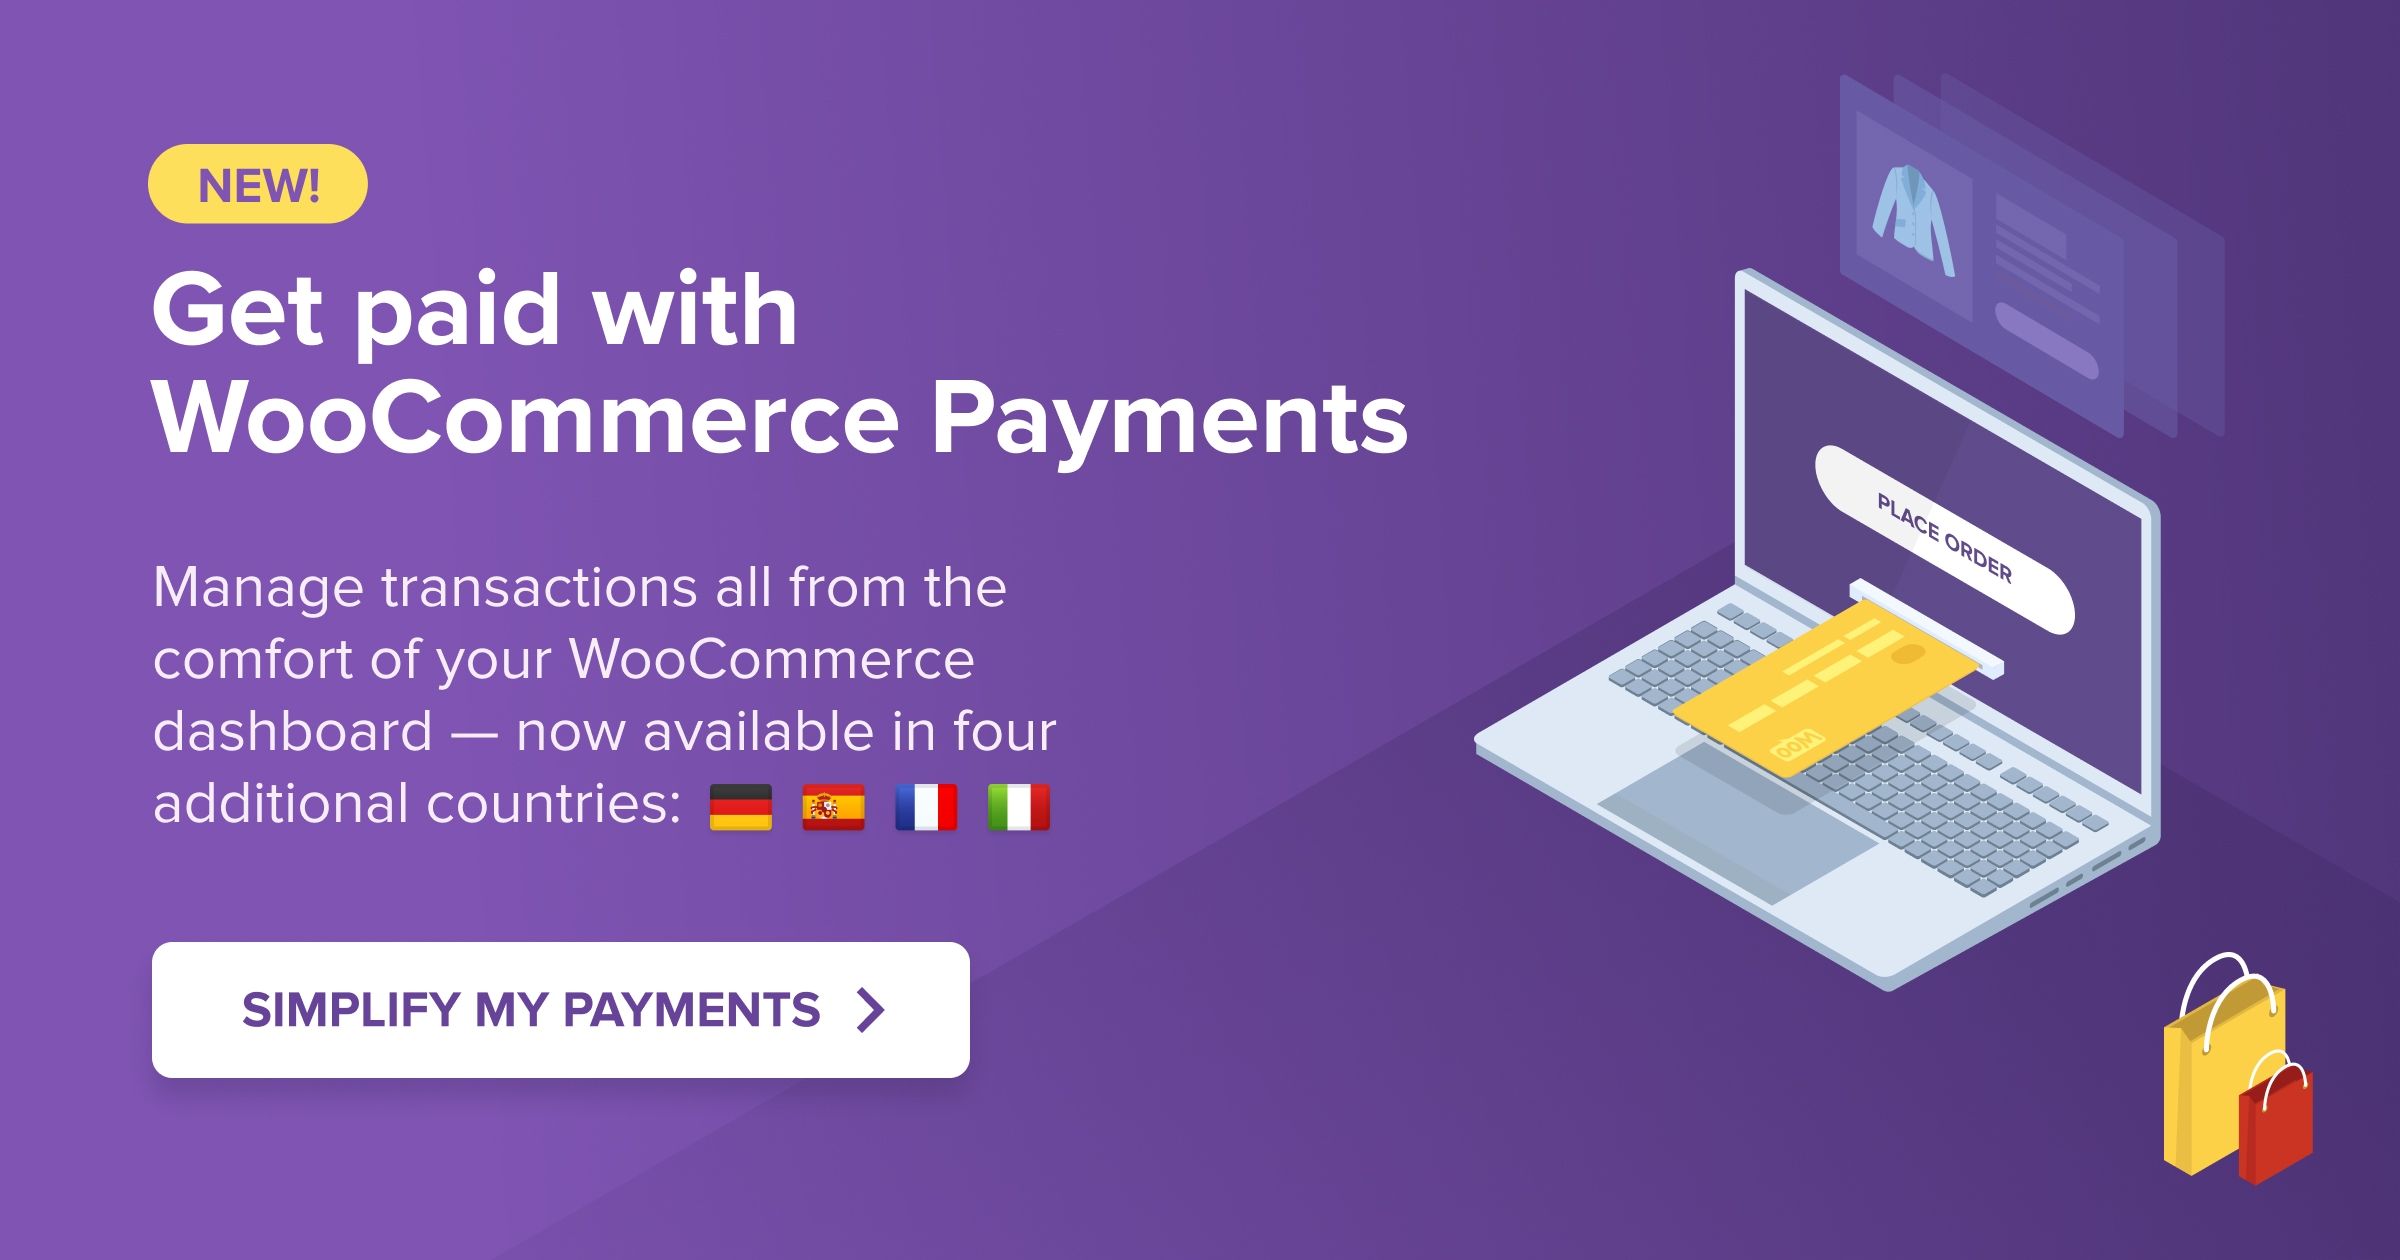 Get WooCommerce Payments